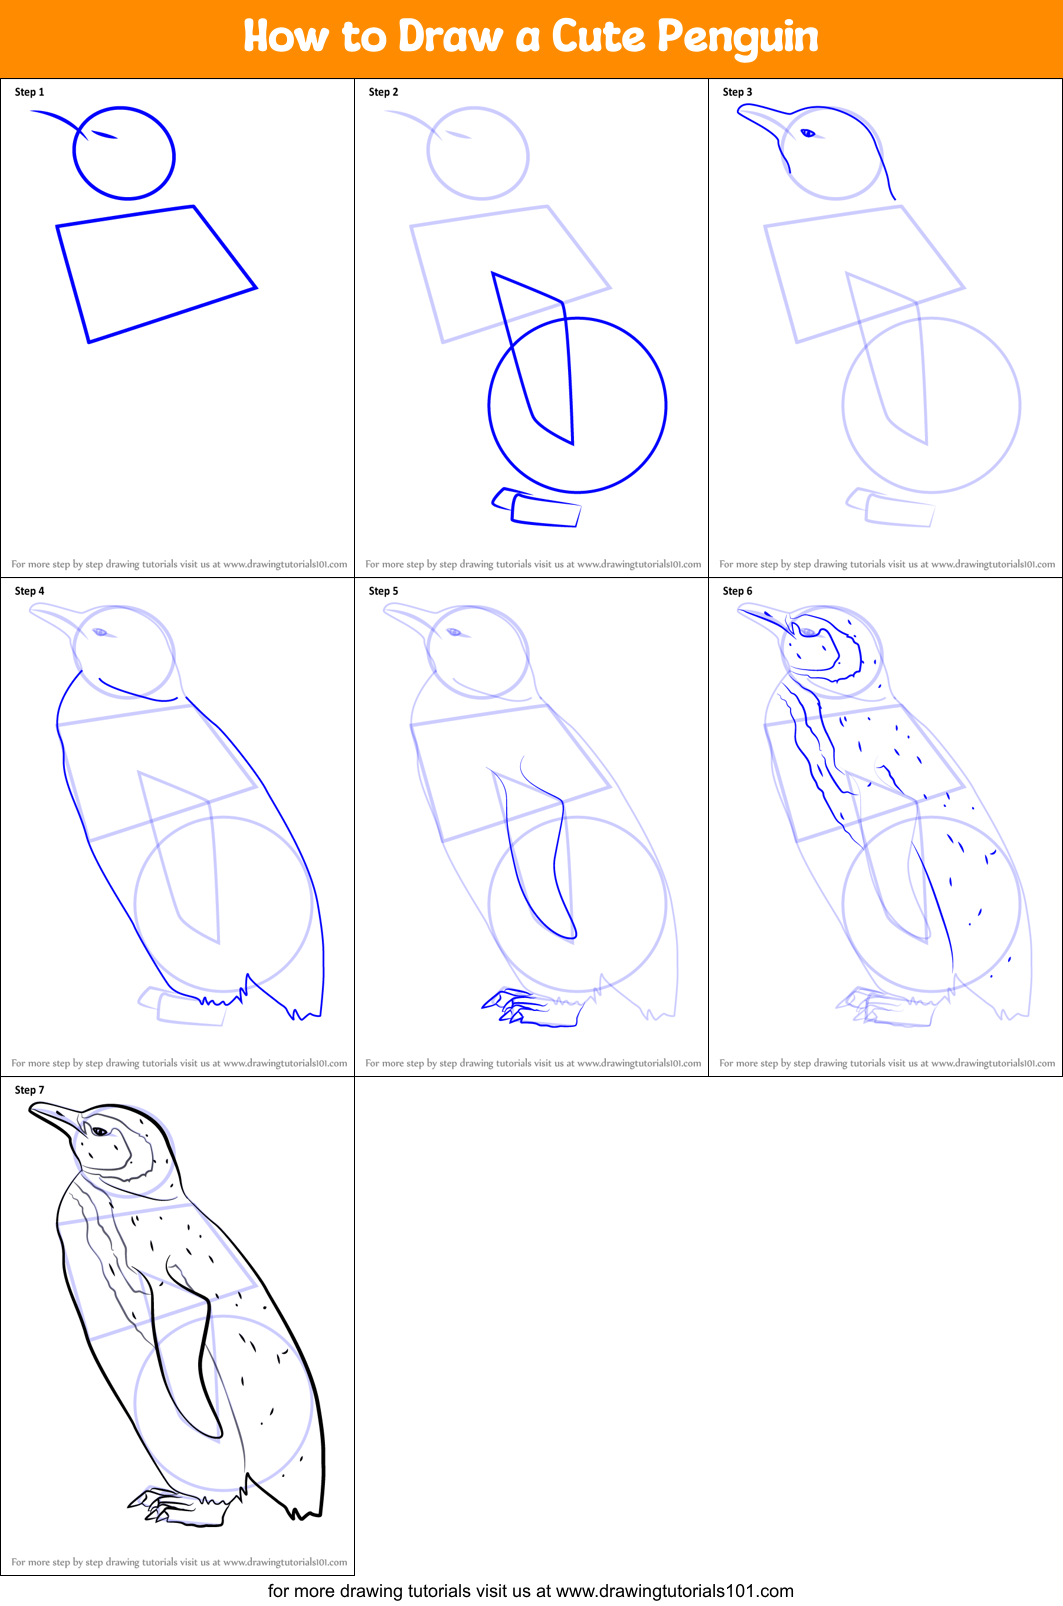 How to Draw a Cute Penguin printable step by step drawing sheet